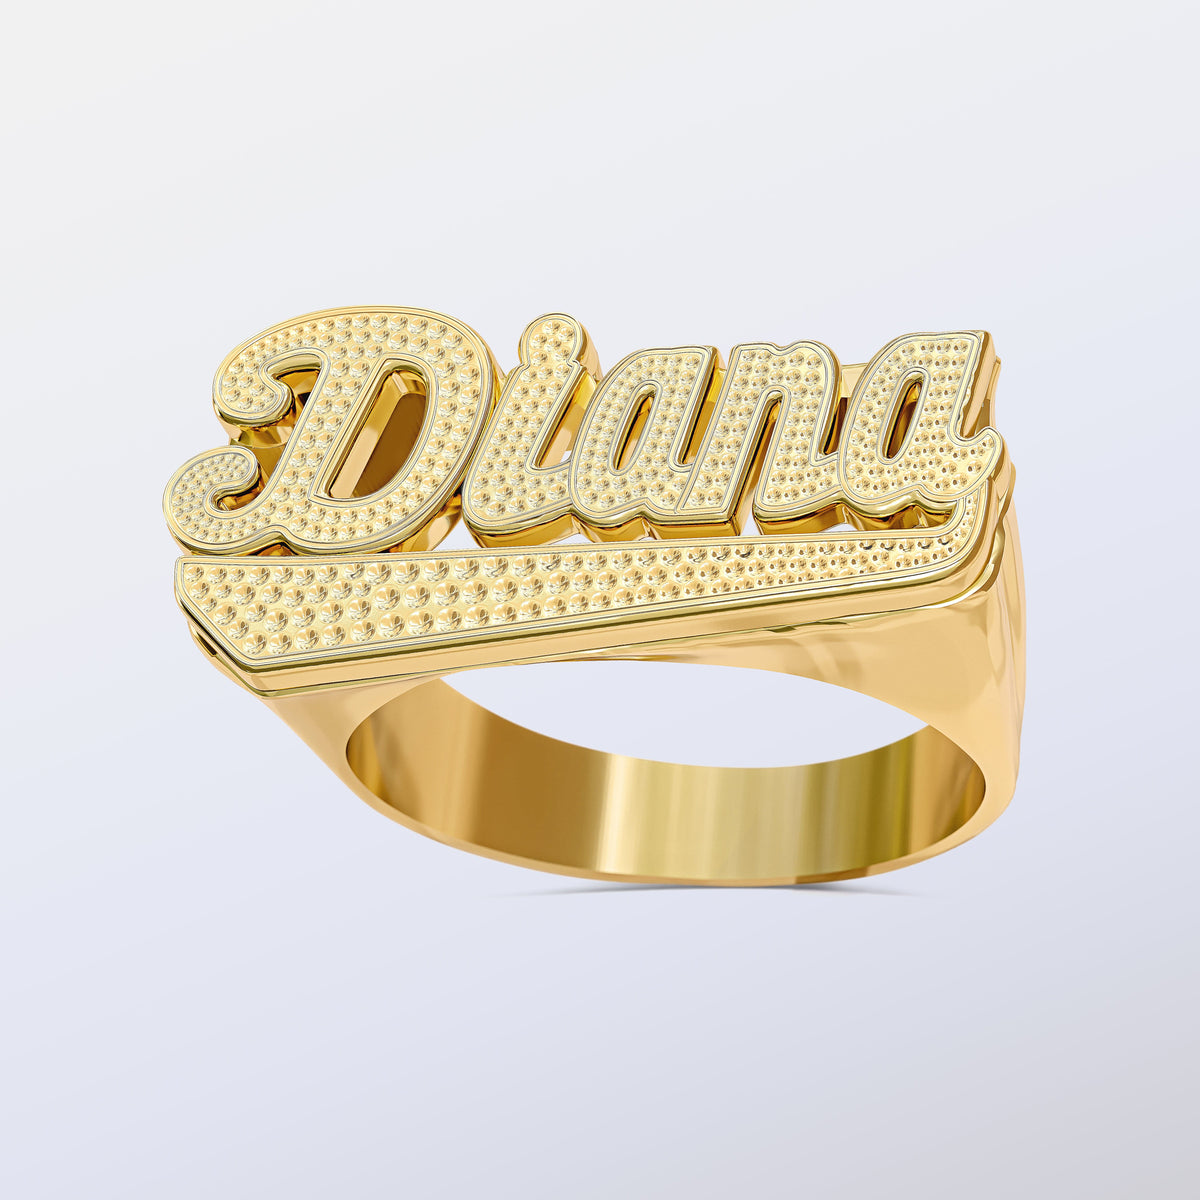 Personalized Name Ring w/ Beading